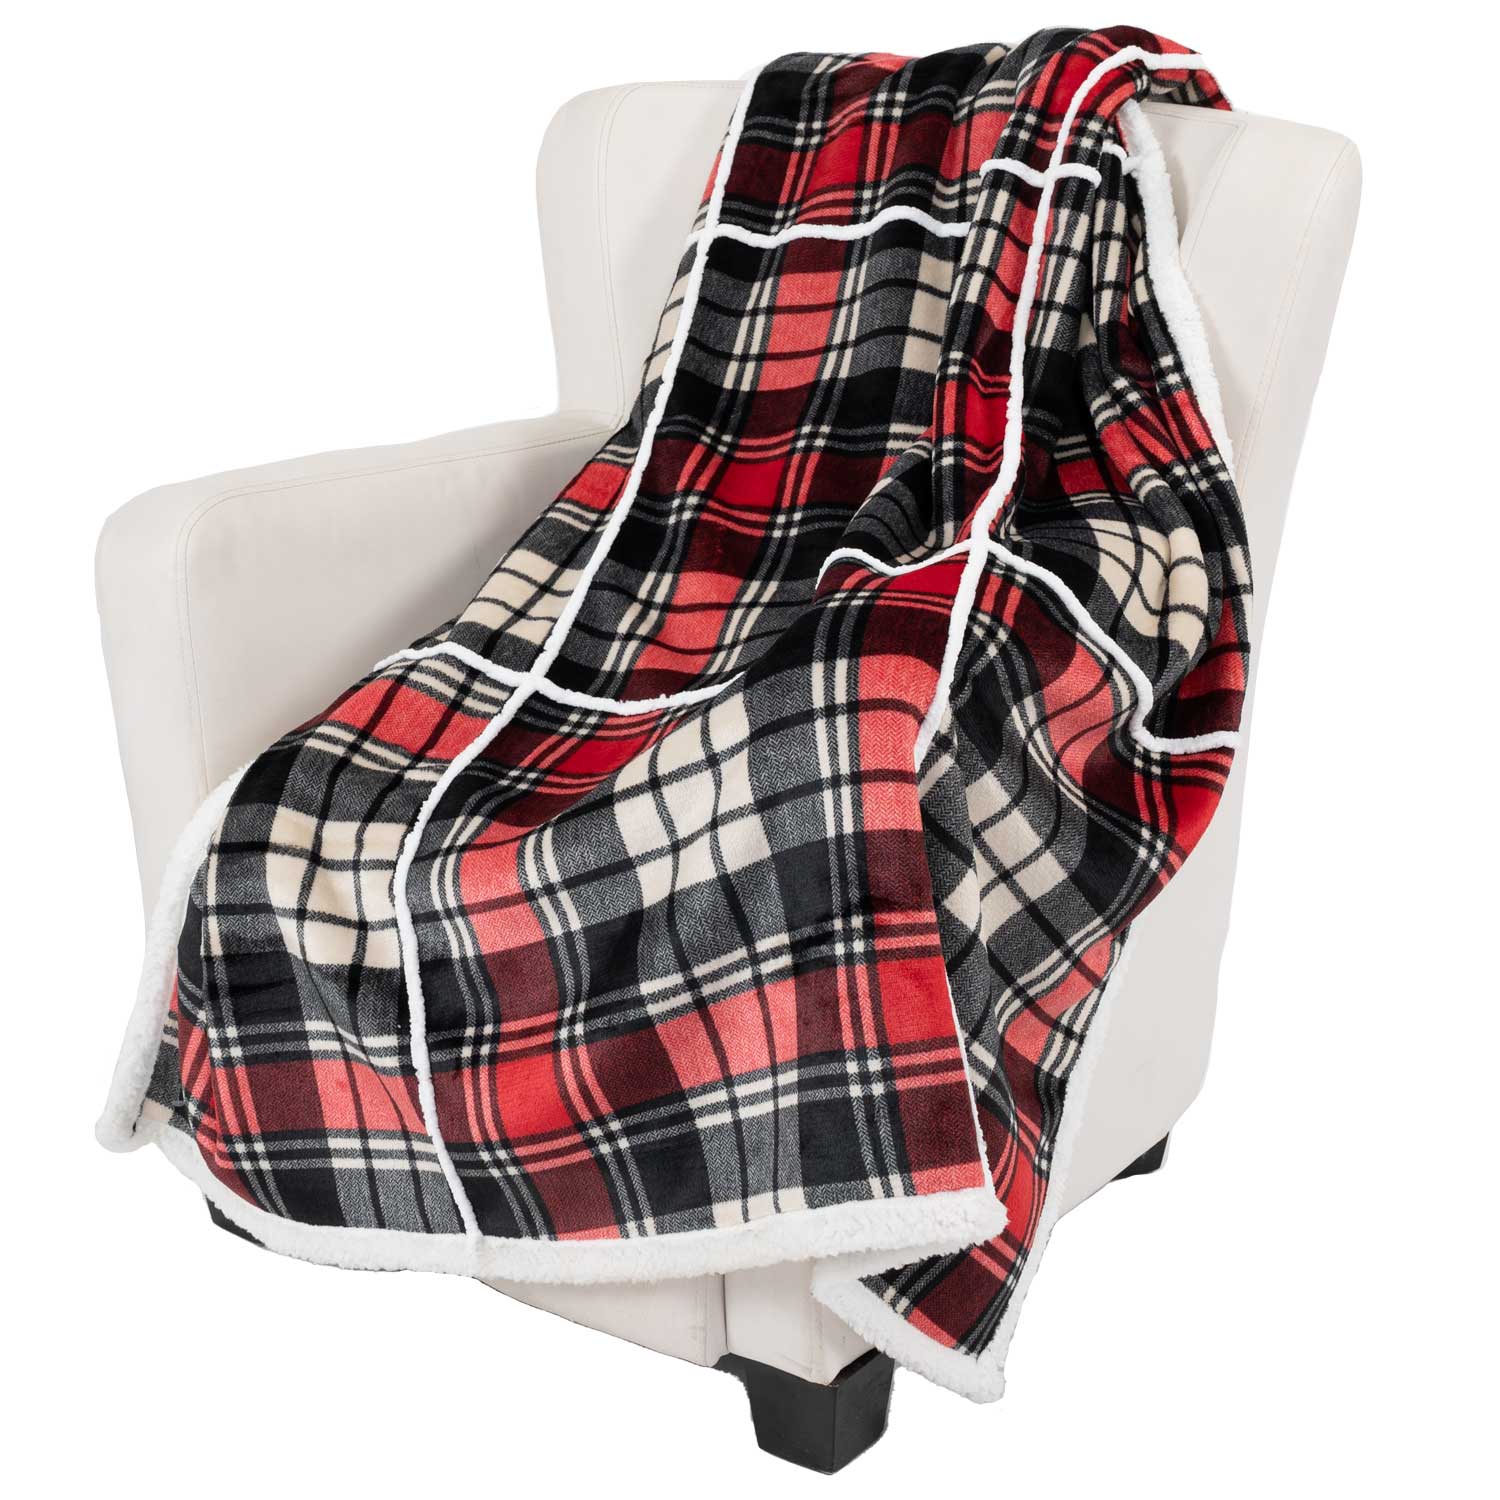 Flannel throw with sherpa reverse, 48"x60"